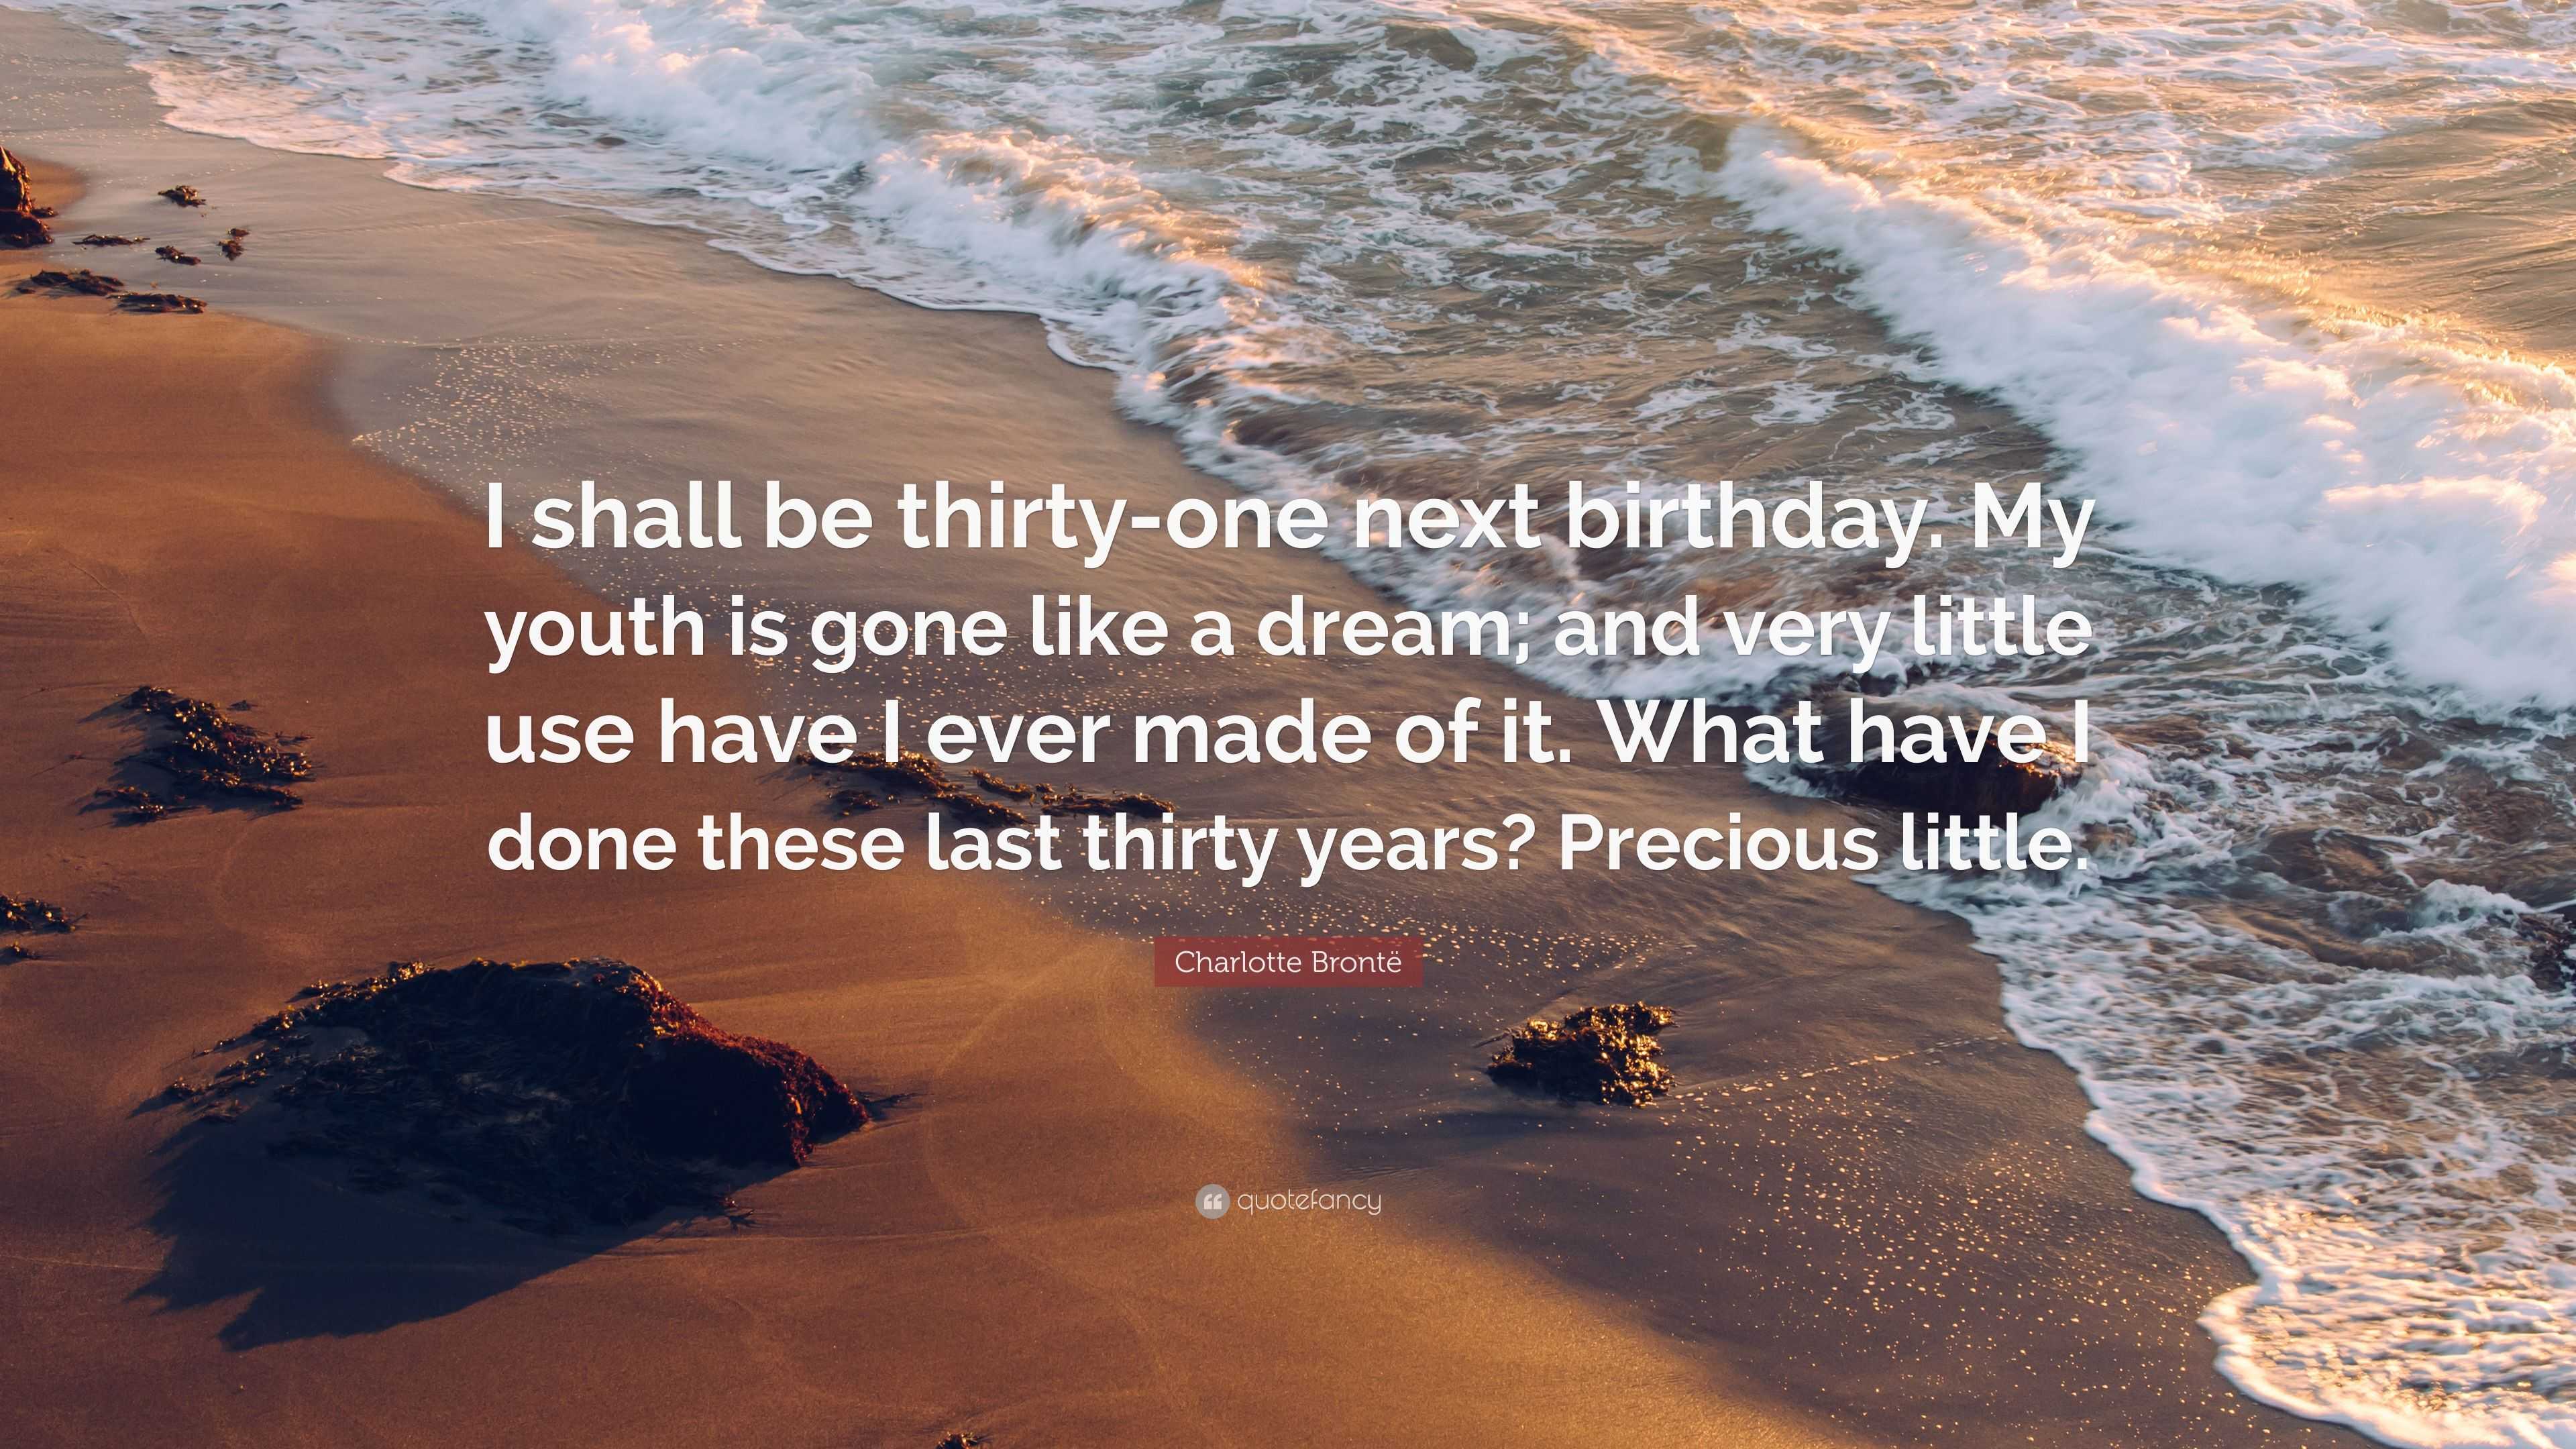 20 quotes on life by Charlotte Bronte on her 201st birthday